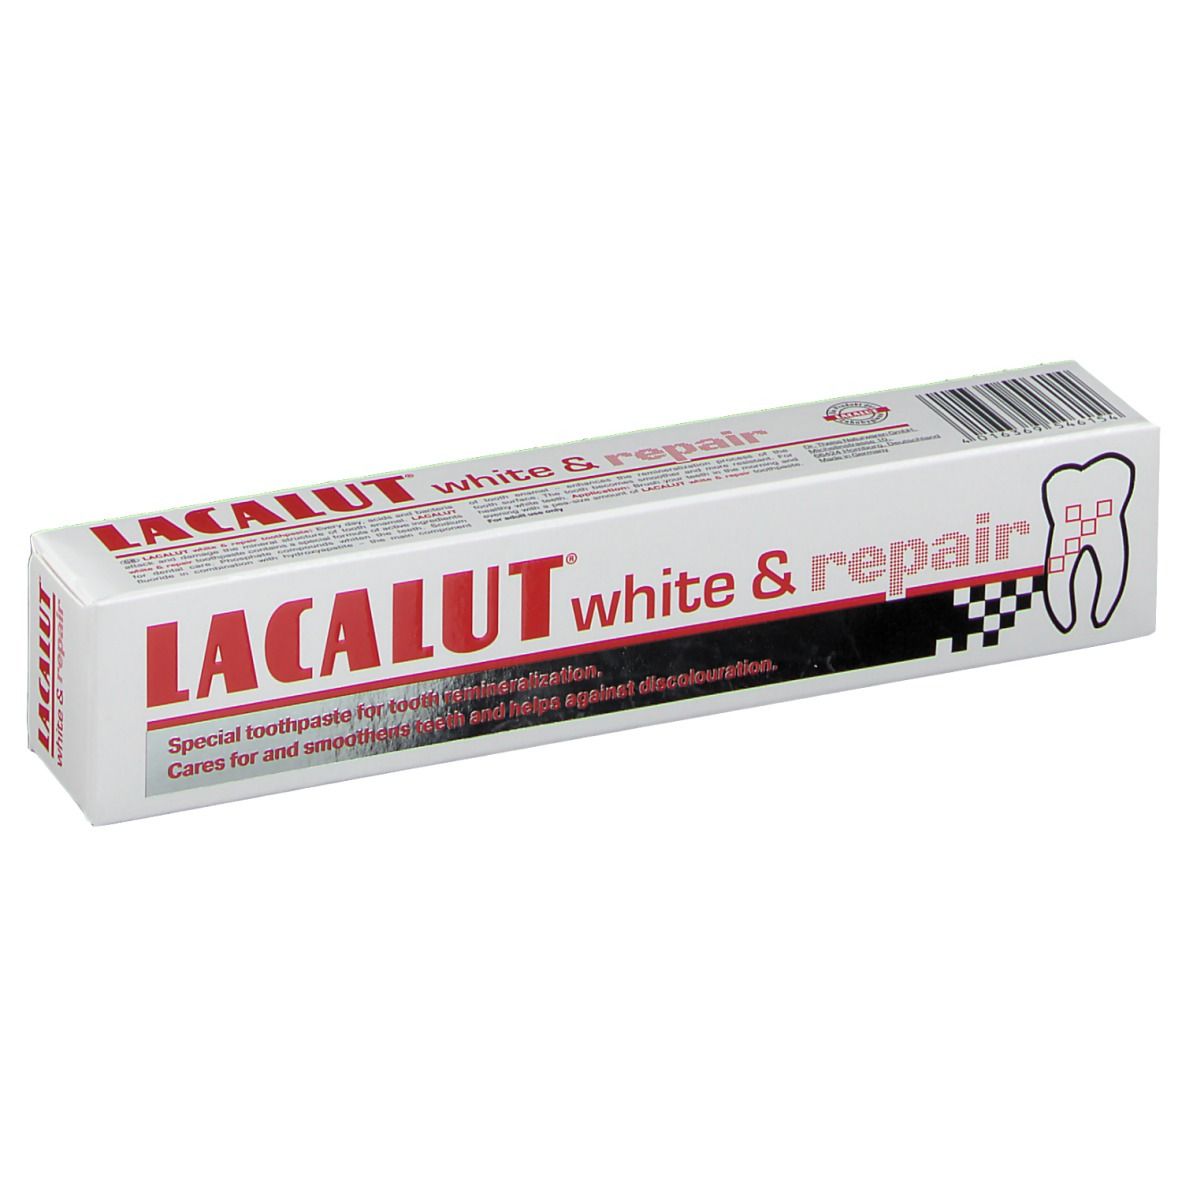 ethnic Well educated dry lacalut white & repair – صيدلية أوزون